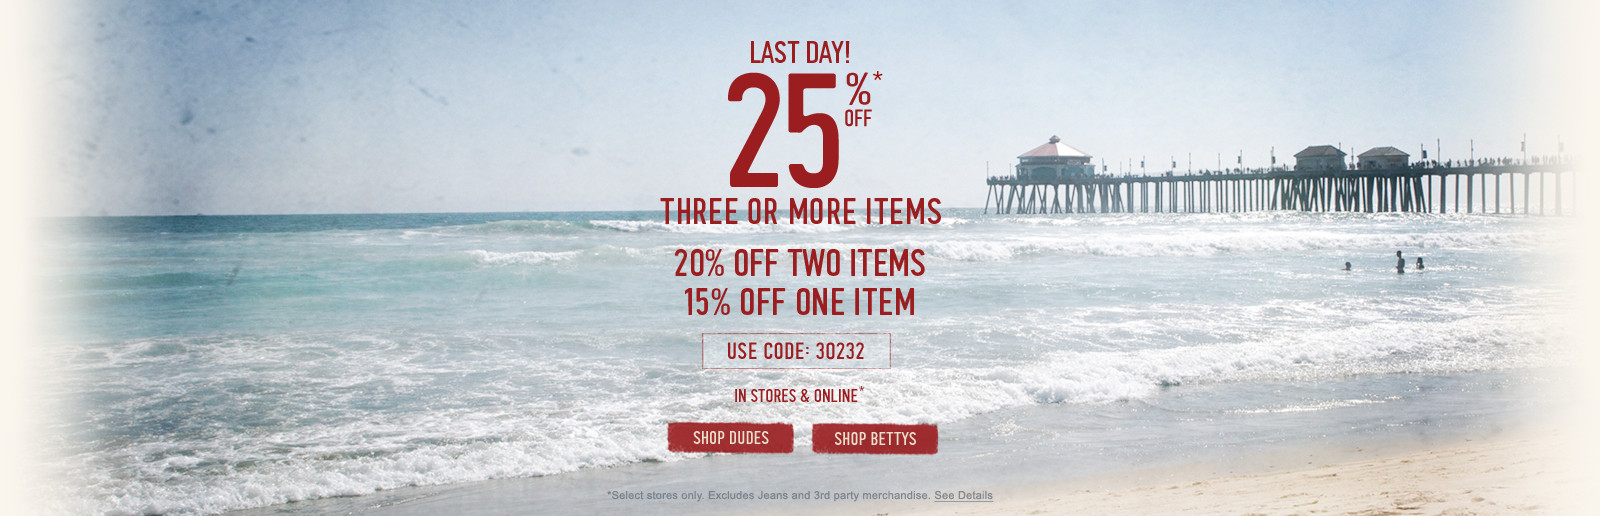 Hollister Company Promotional Code and Sales Save 50 Off All Tops